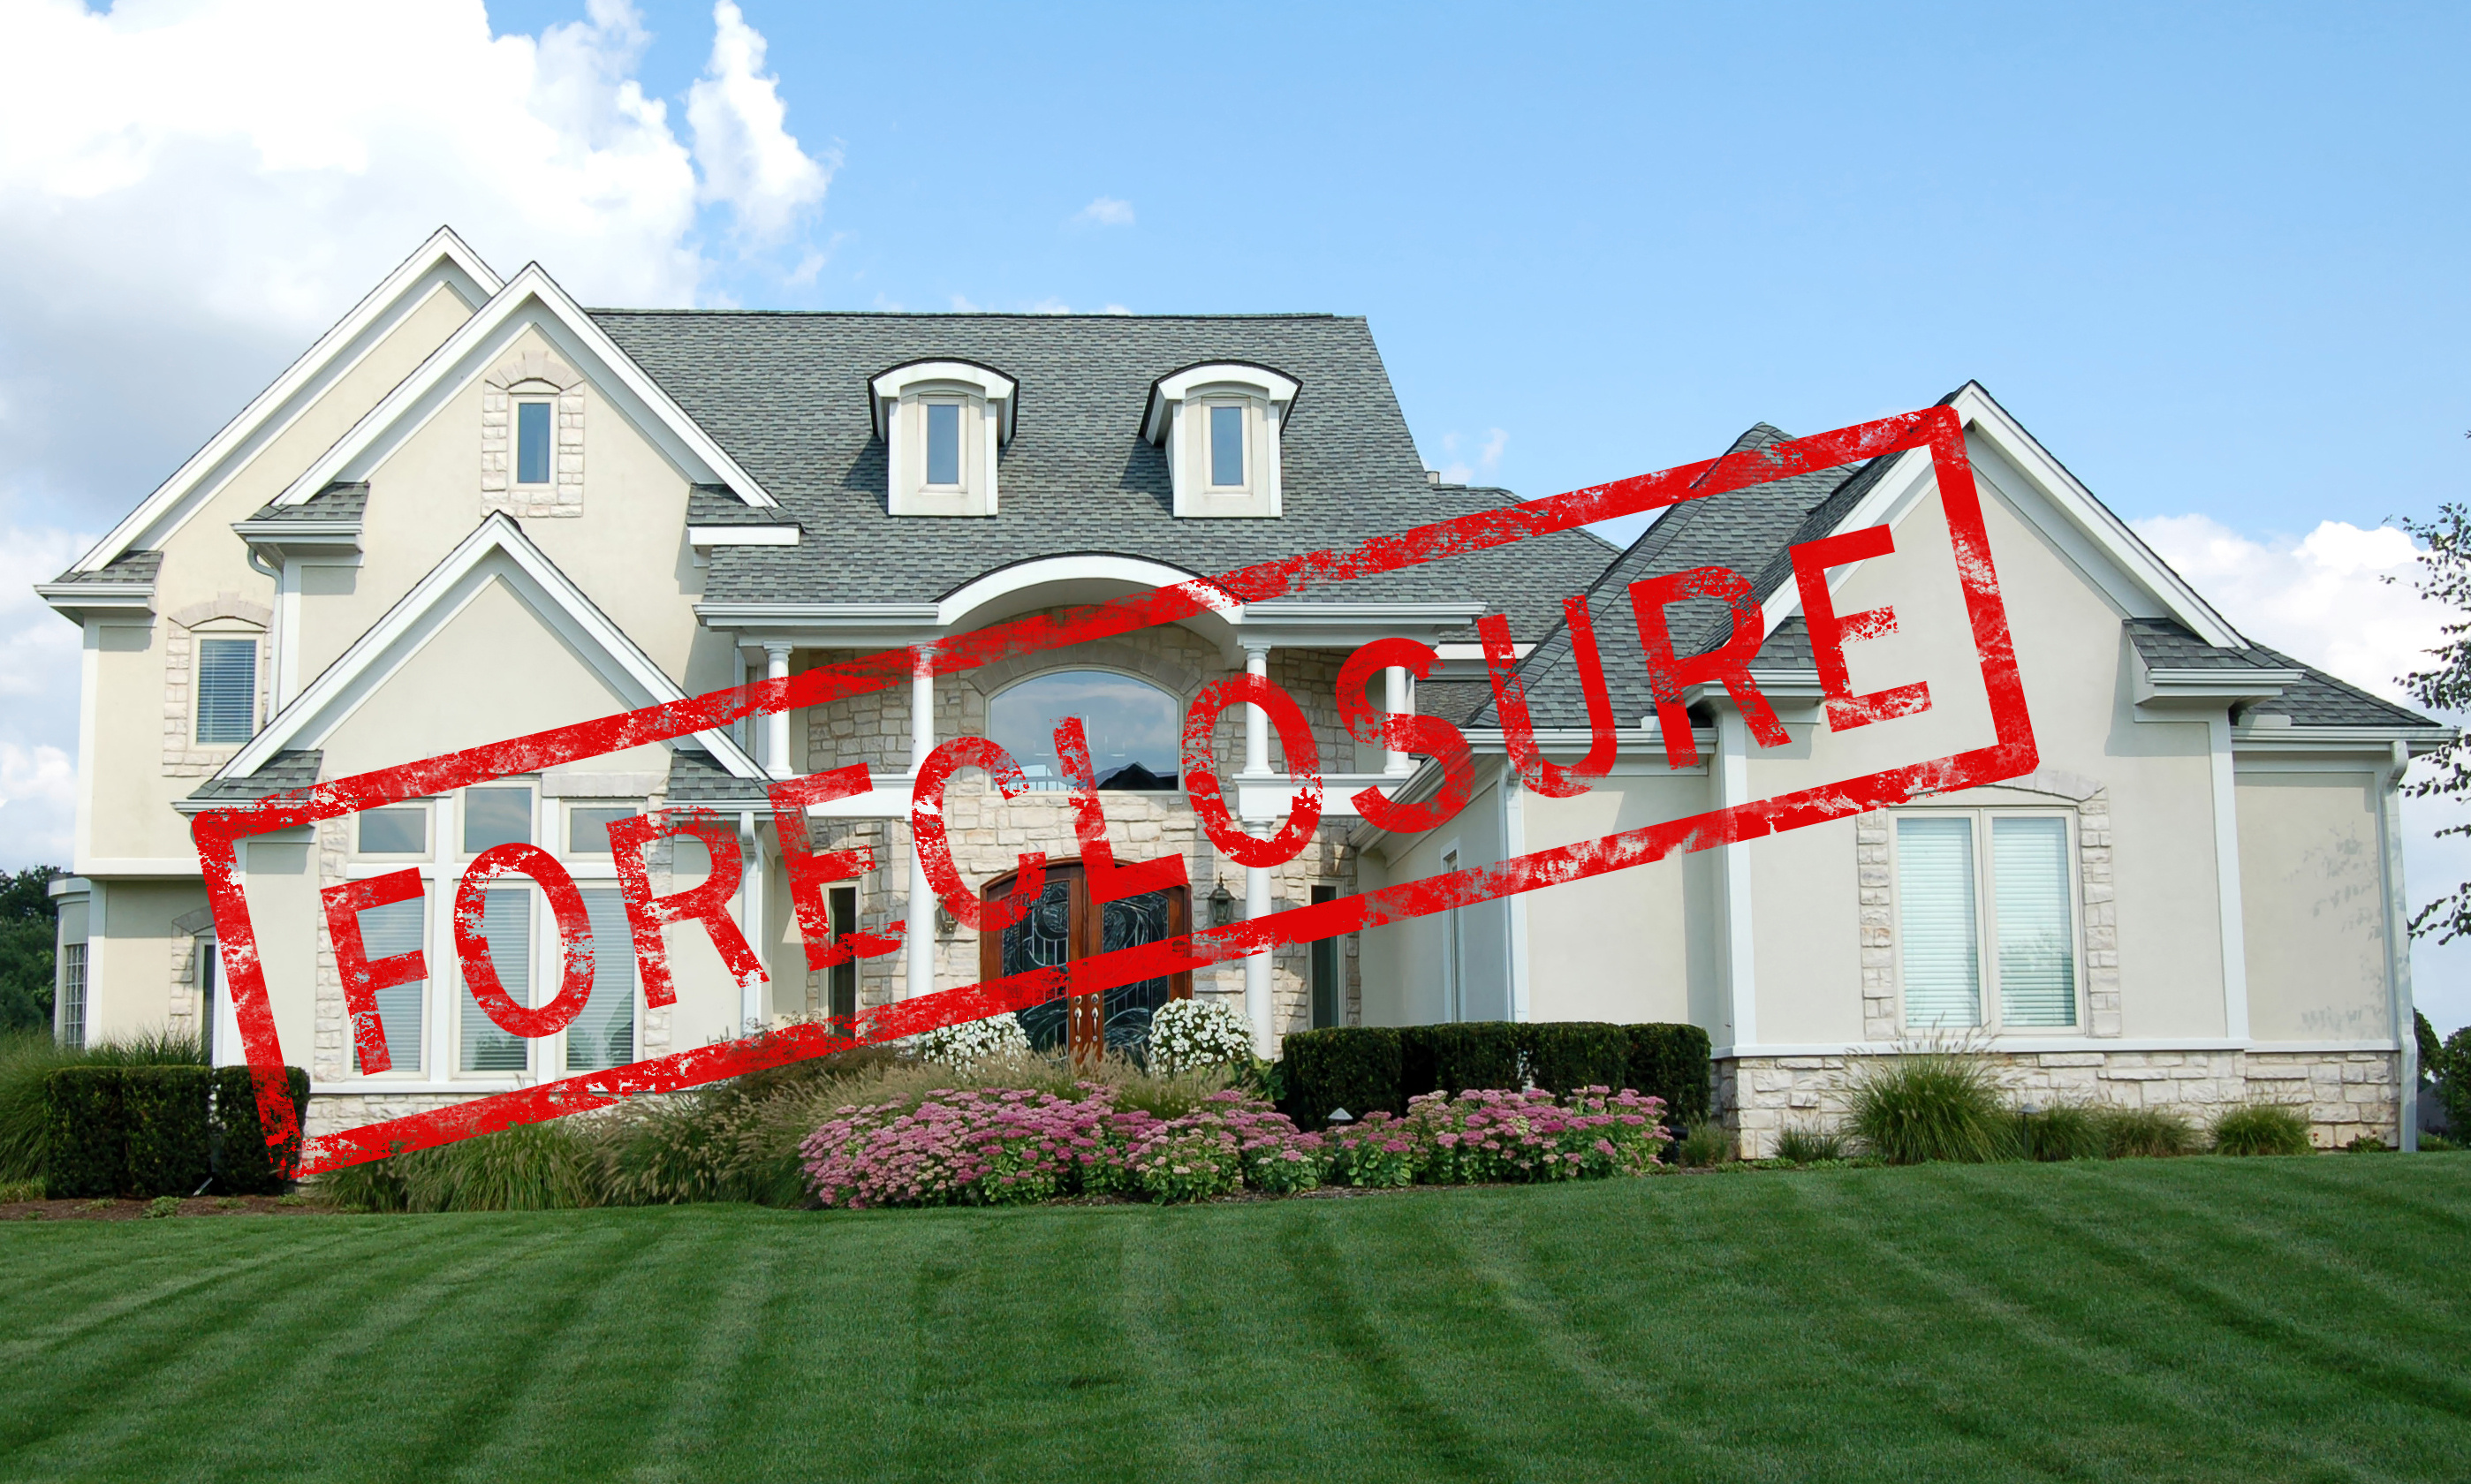 Call First Appraisal Services to order valuations of Will foreclosures